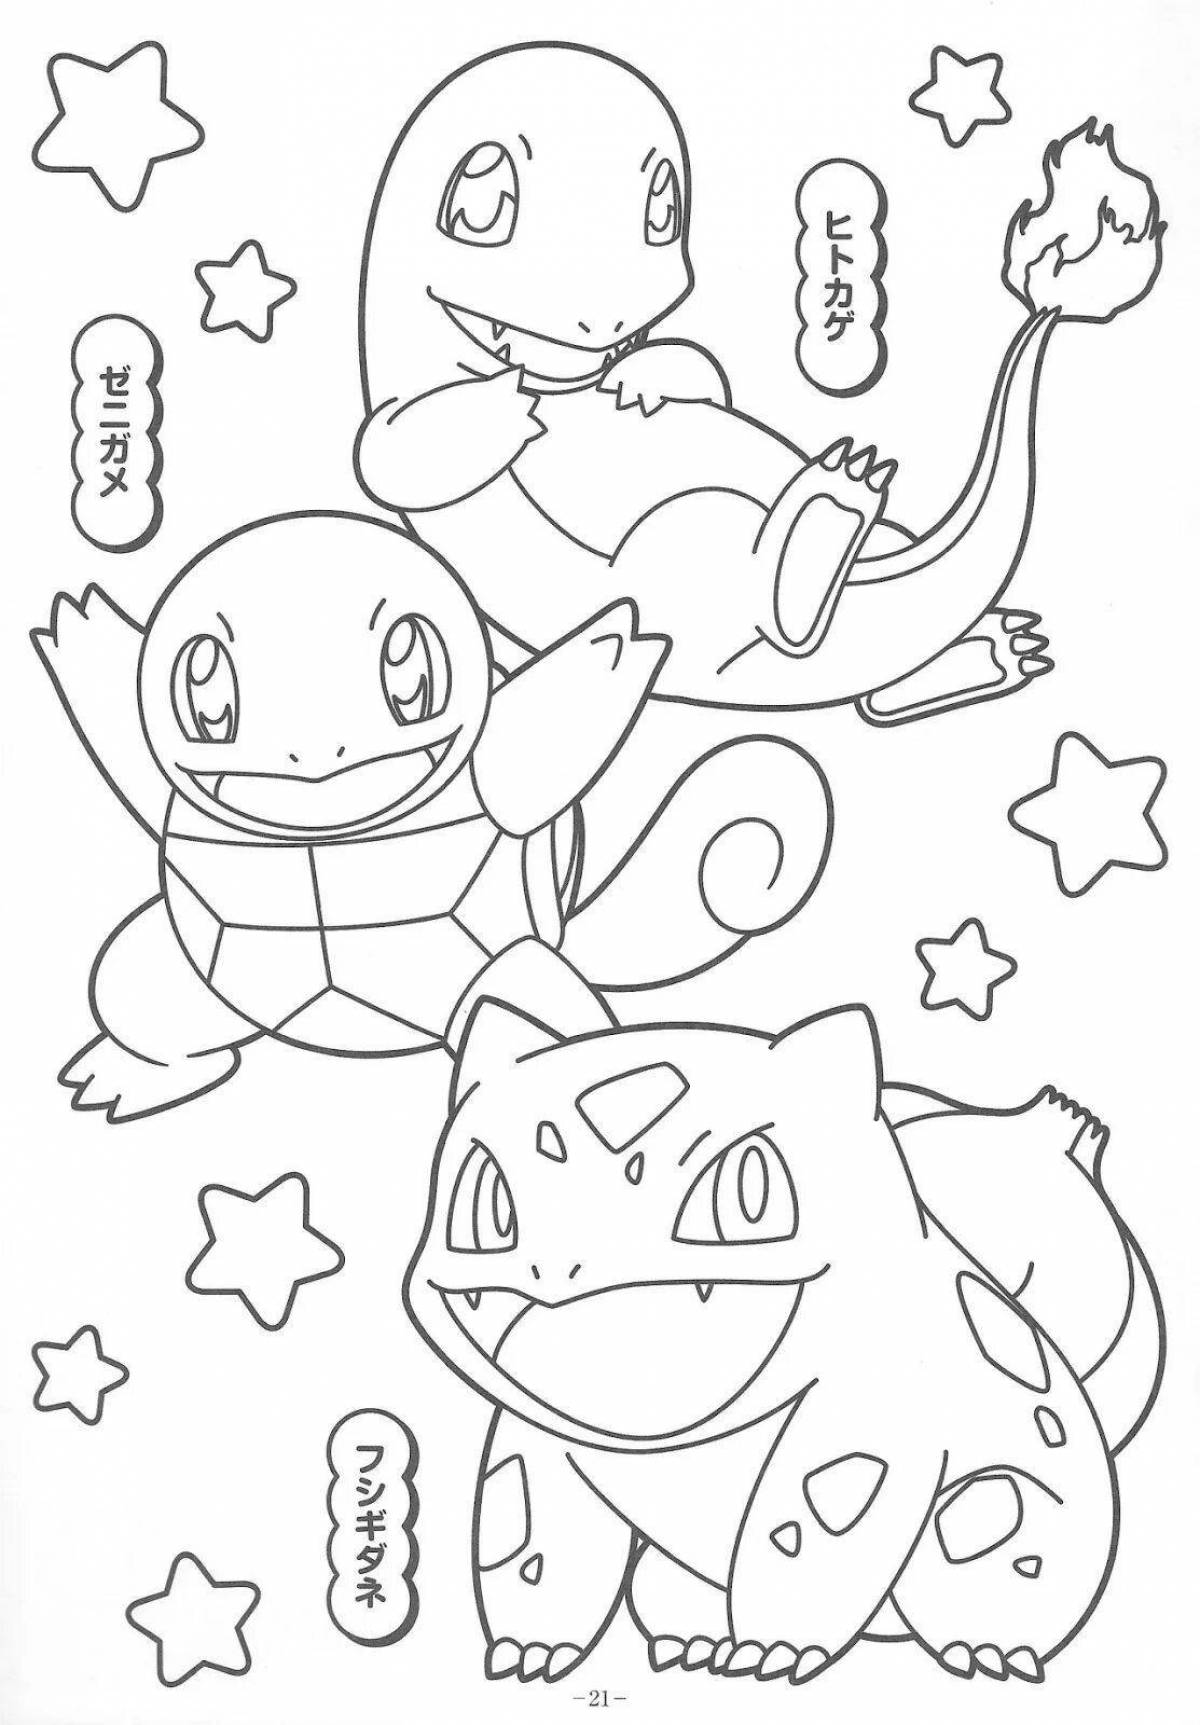 Coloring page playful squirtle pokemon